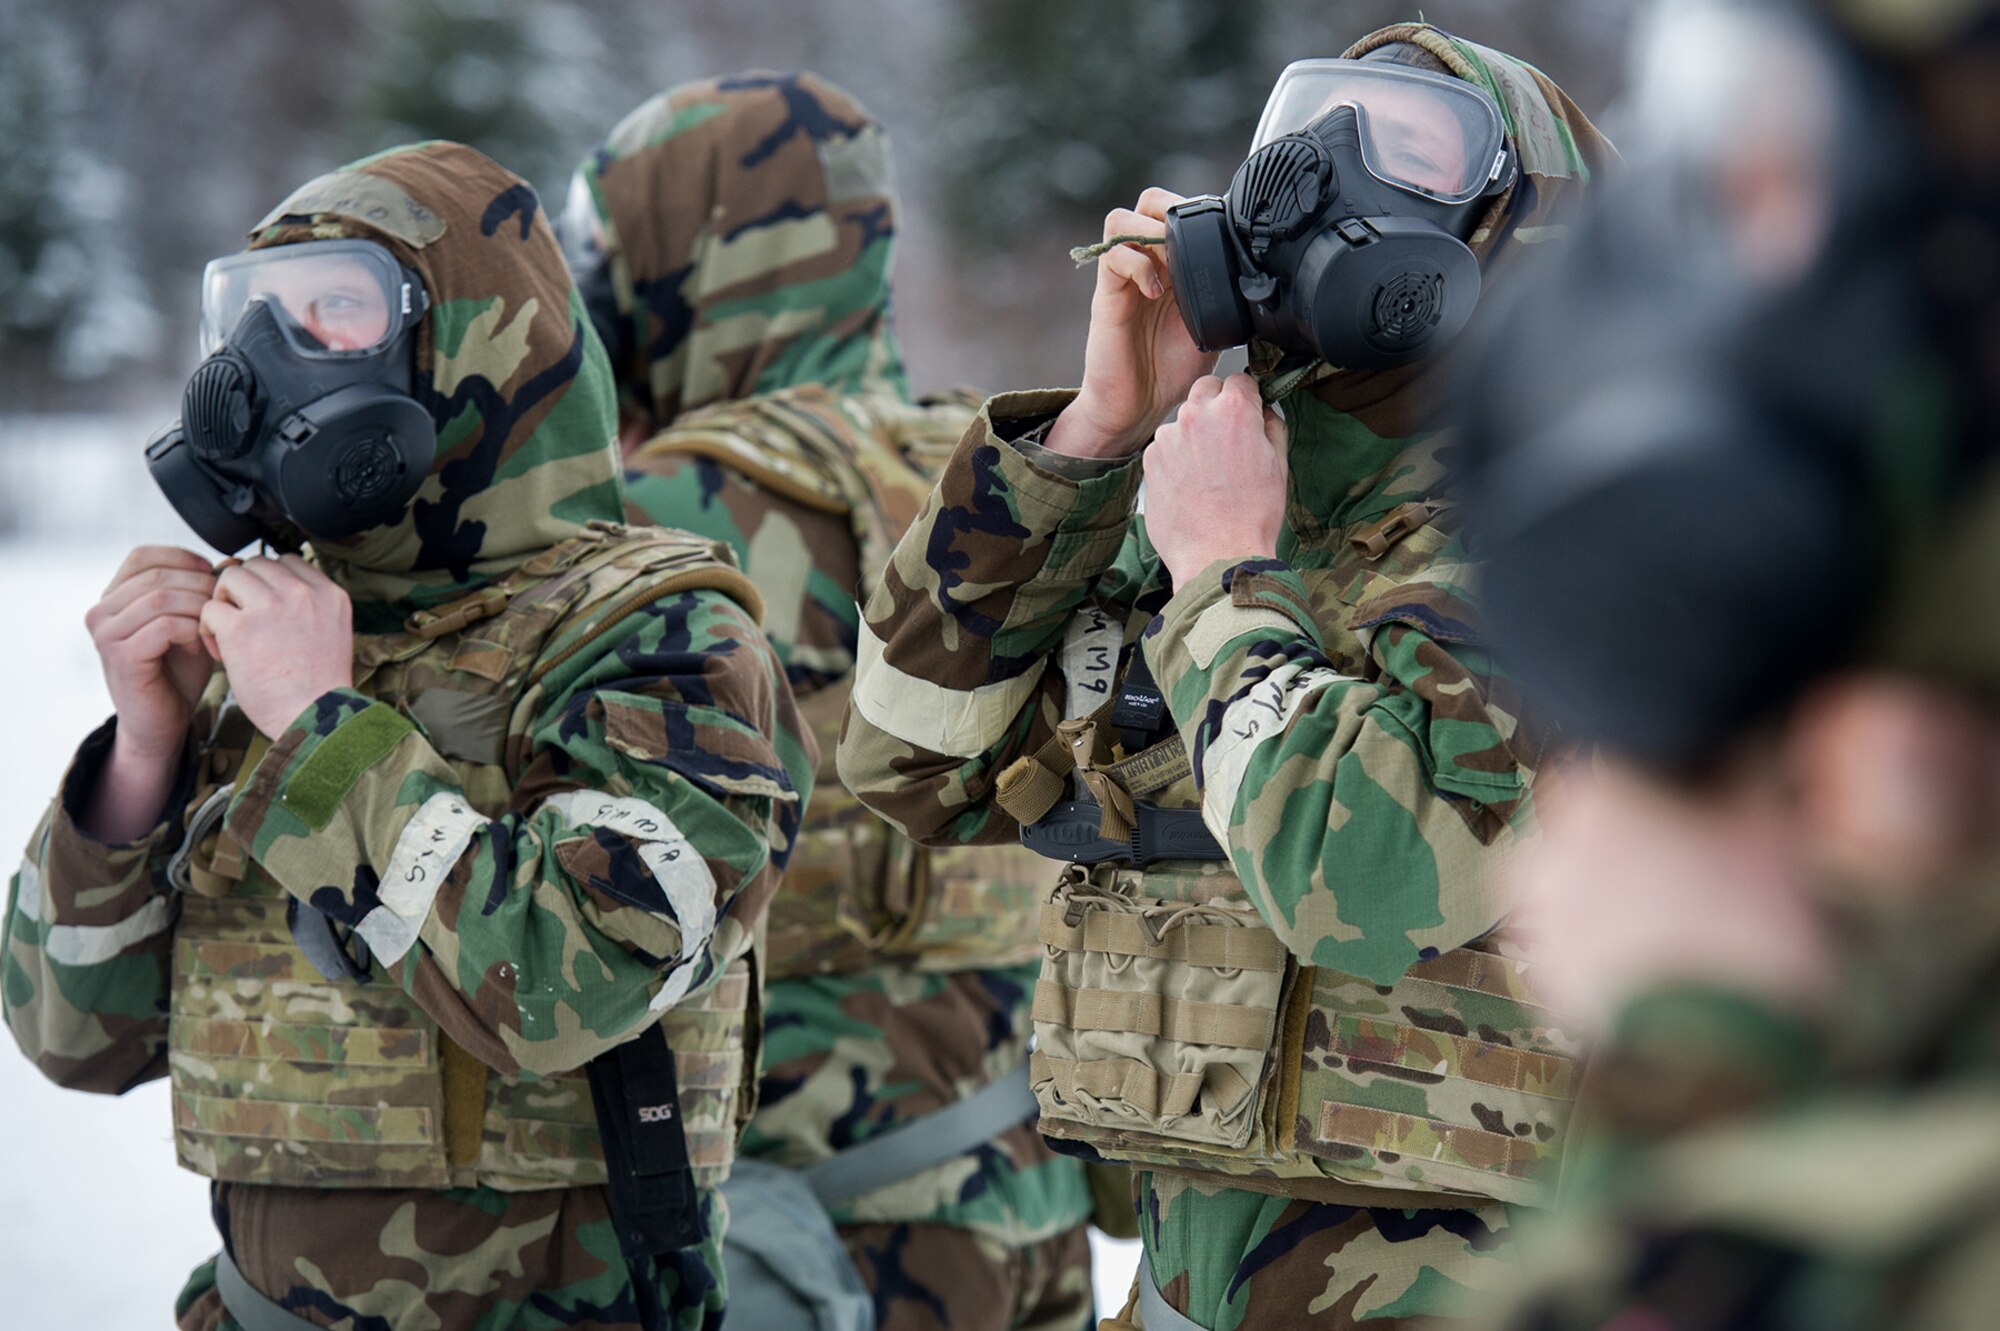 Airmen assigned to the 673d Civil Engineer Squadron, Explosives Ordinance Disposal Flight, don protective gear before a live-fire demolitions exercise in Mission Oriented Protective Posture 4 on Joint Base Elmendorf-Richardson, Alaska, Feb.14, 2018.  The Airmen were conducting EOD training in a simulated chemical weapons contaminated environment.